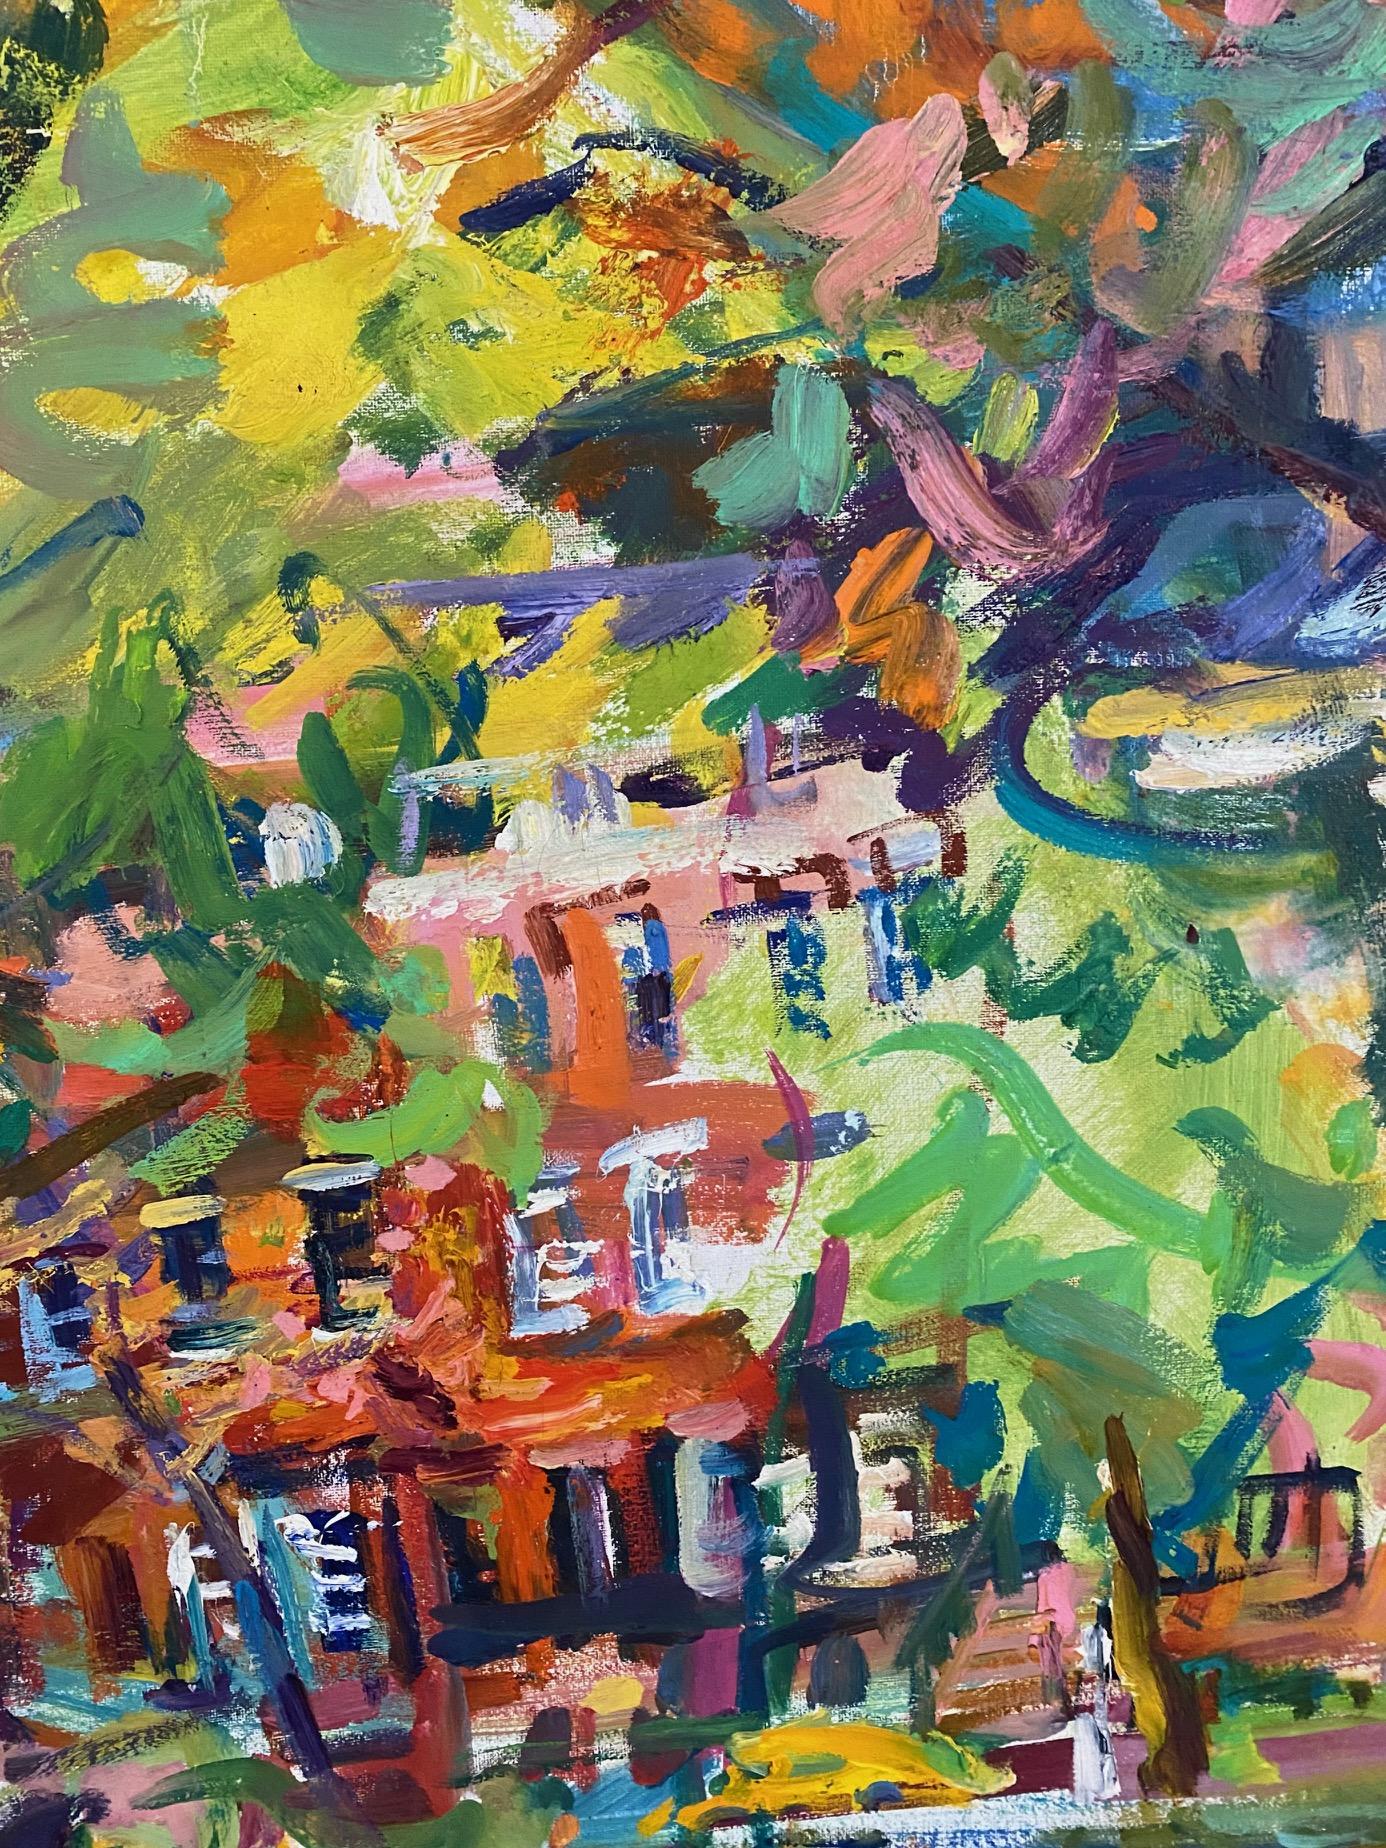 Washington Square Park NW, original 24x30 abstract expressionist NYC landscape - Abstract Expressionist Painting by Sonia Grineva